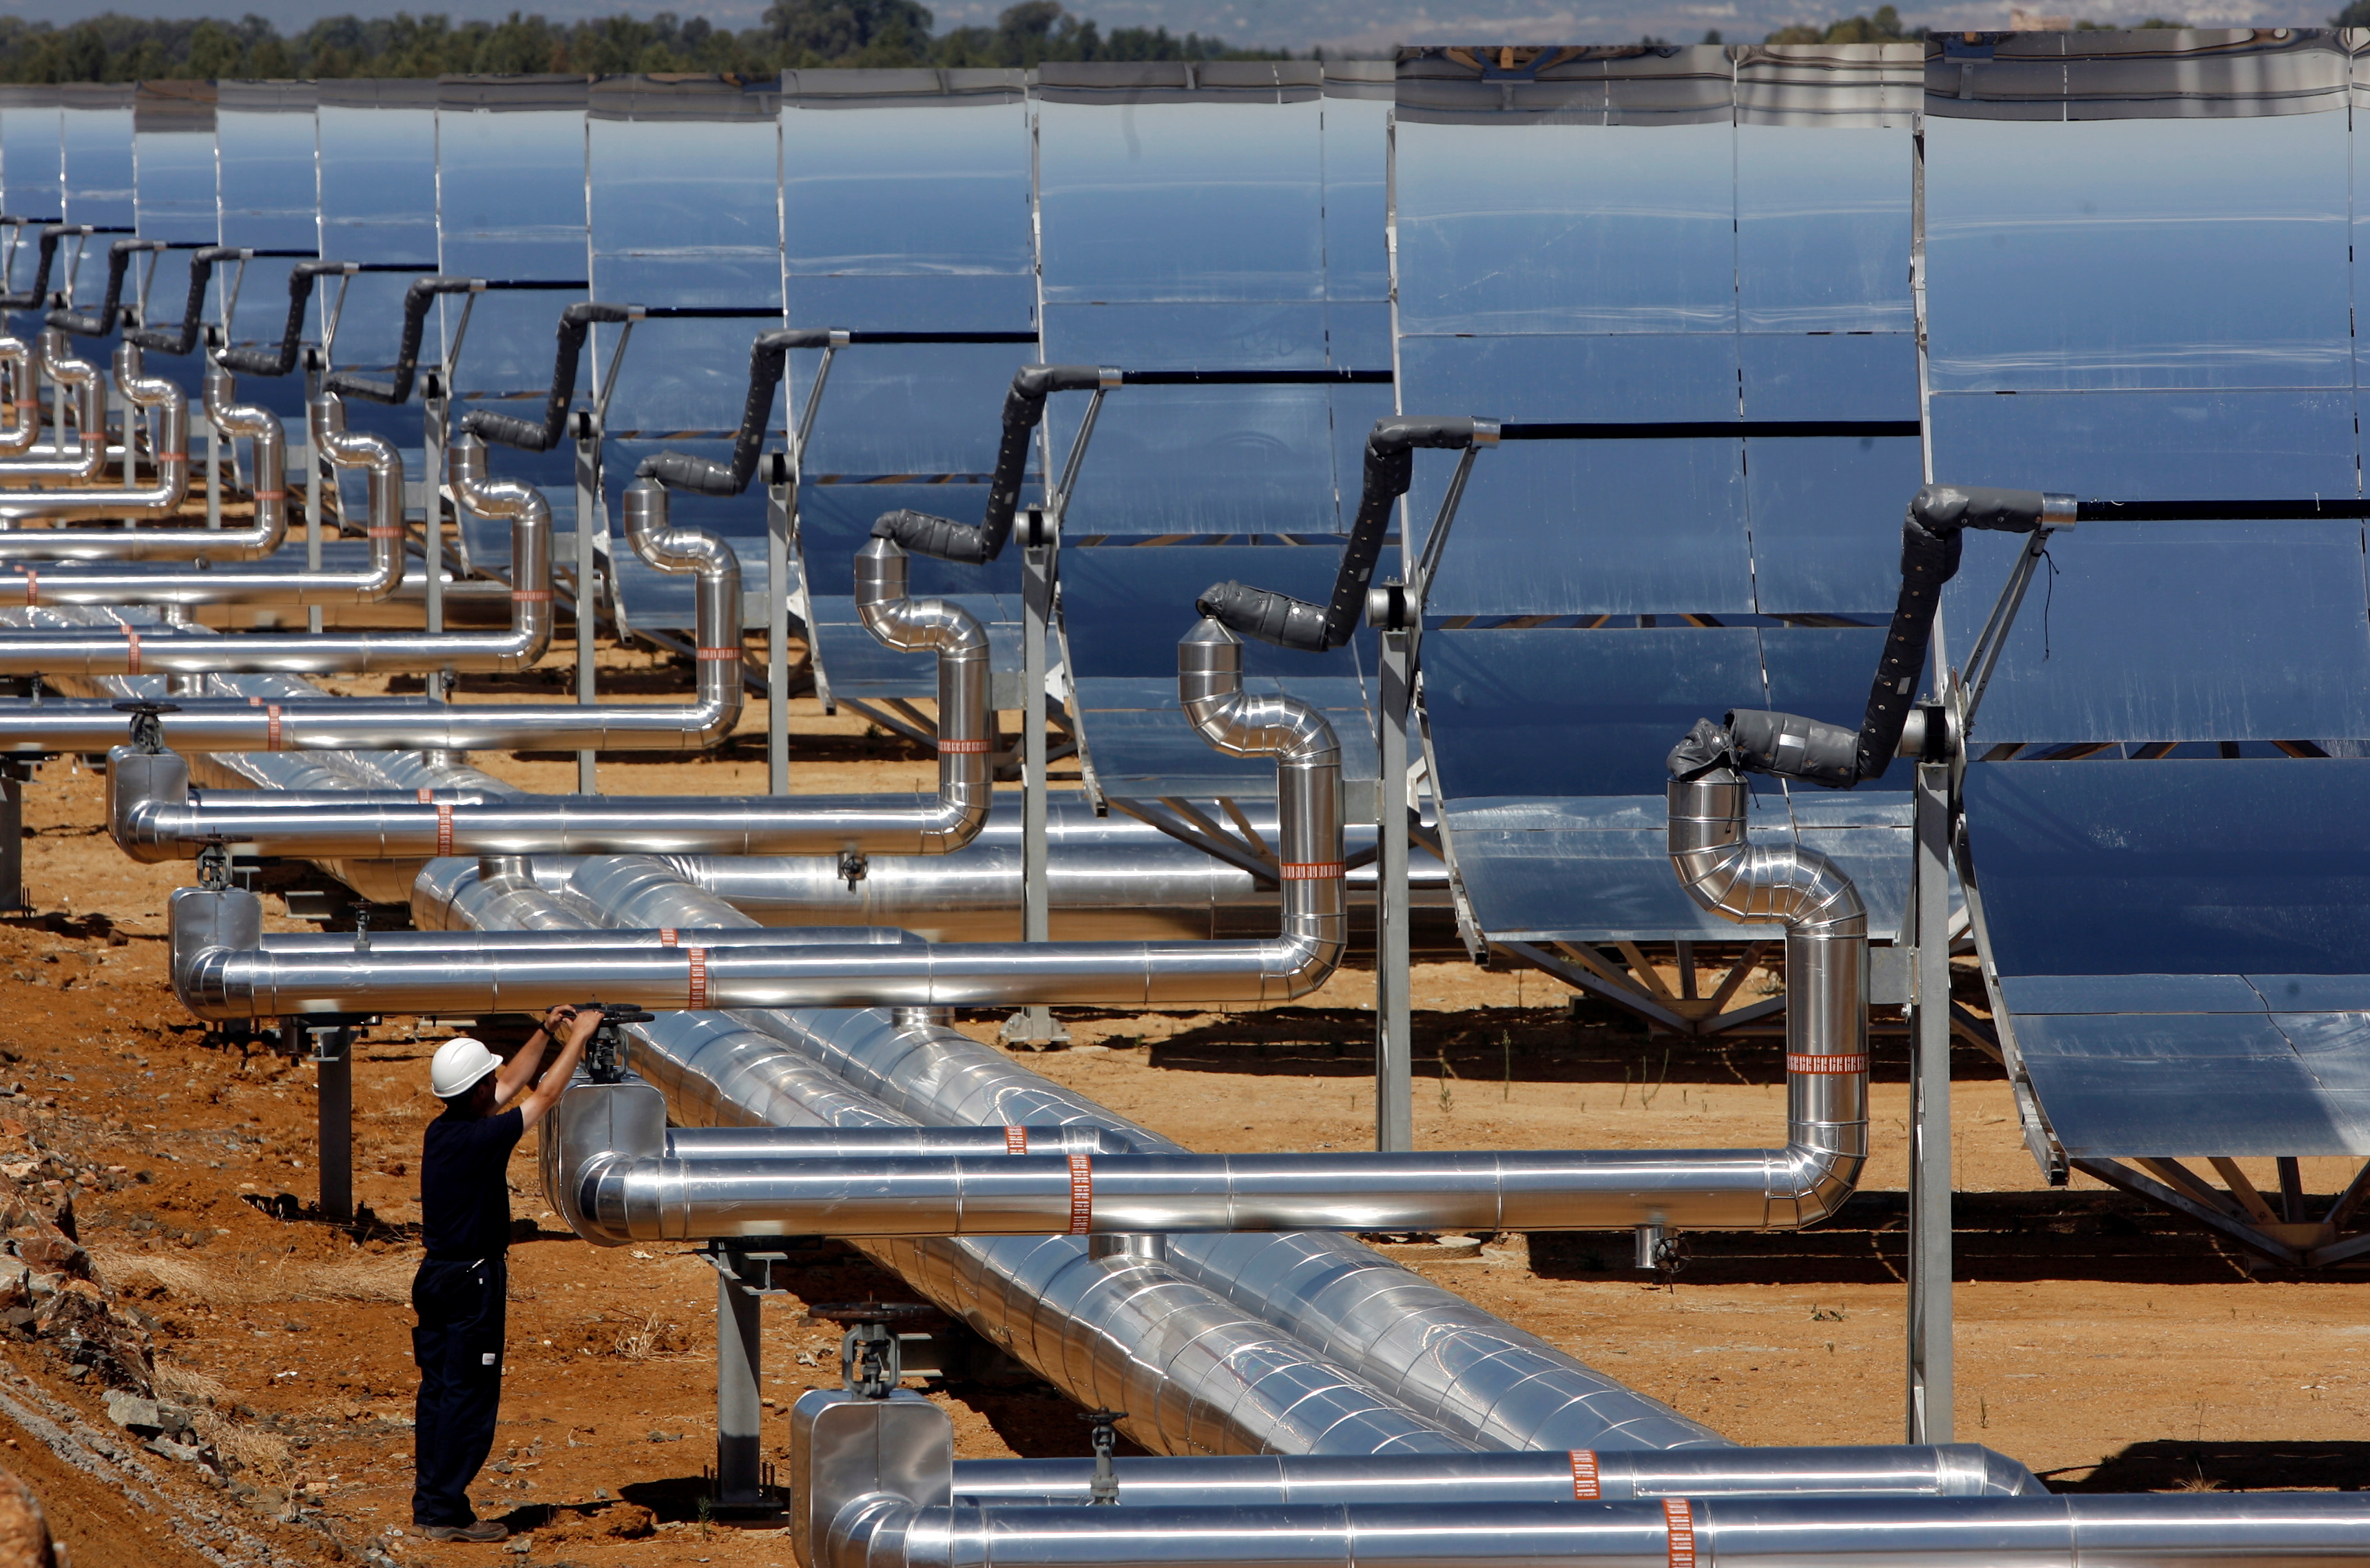 A worker makes adjustments before the inauguration ceremony of a parabolic trough solar thermal power plant in Alvarado